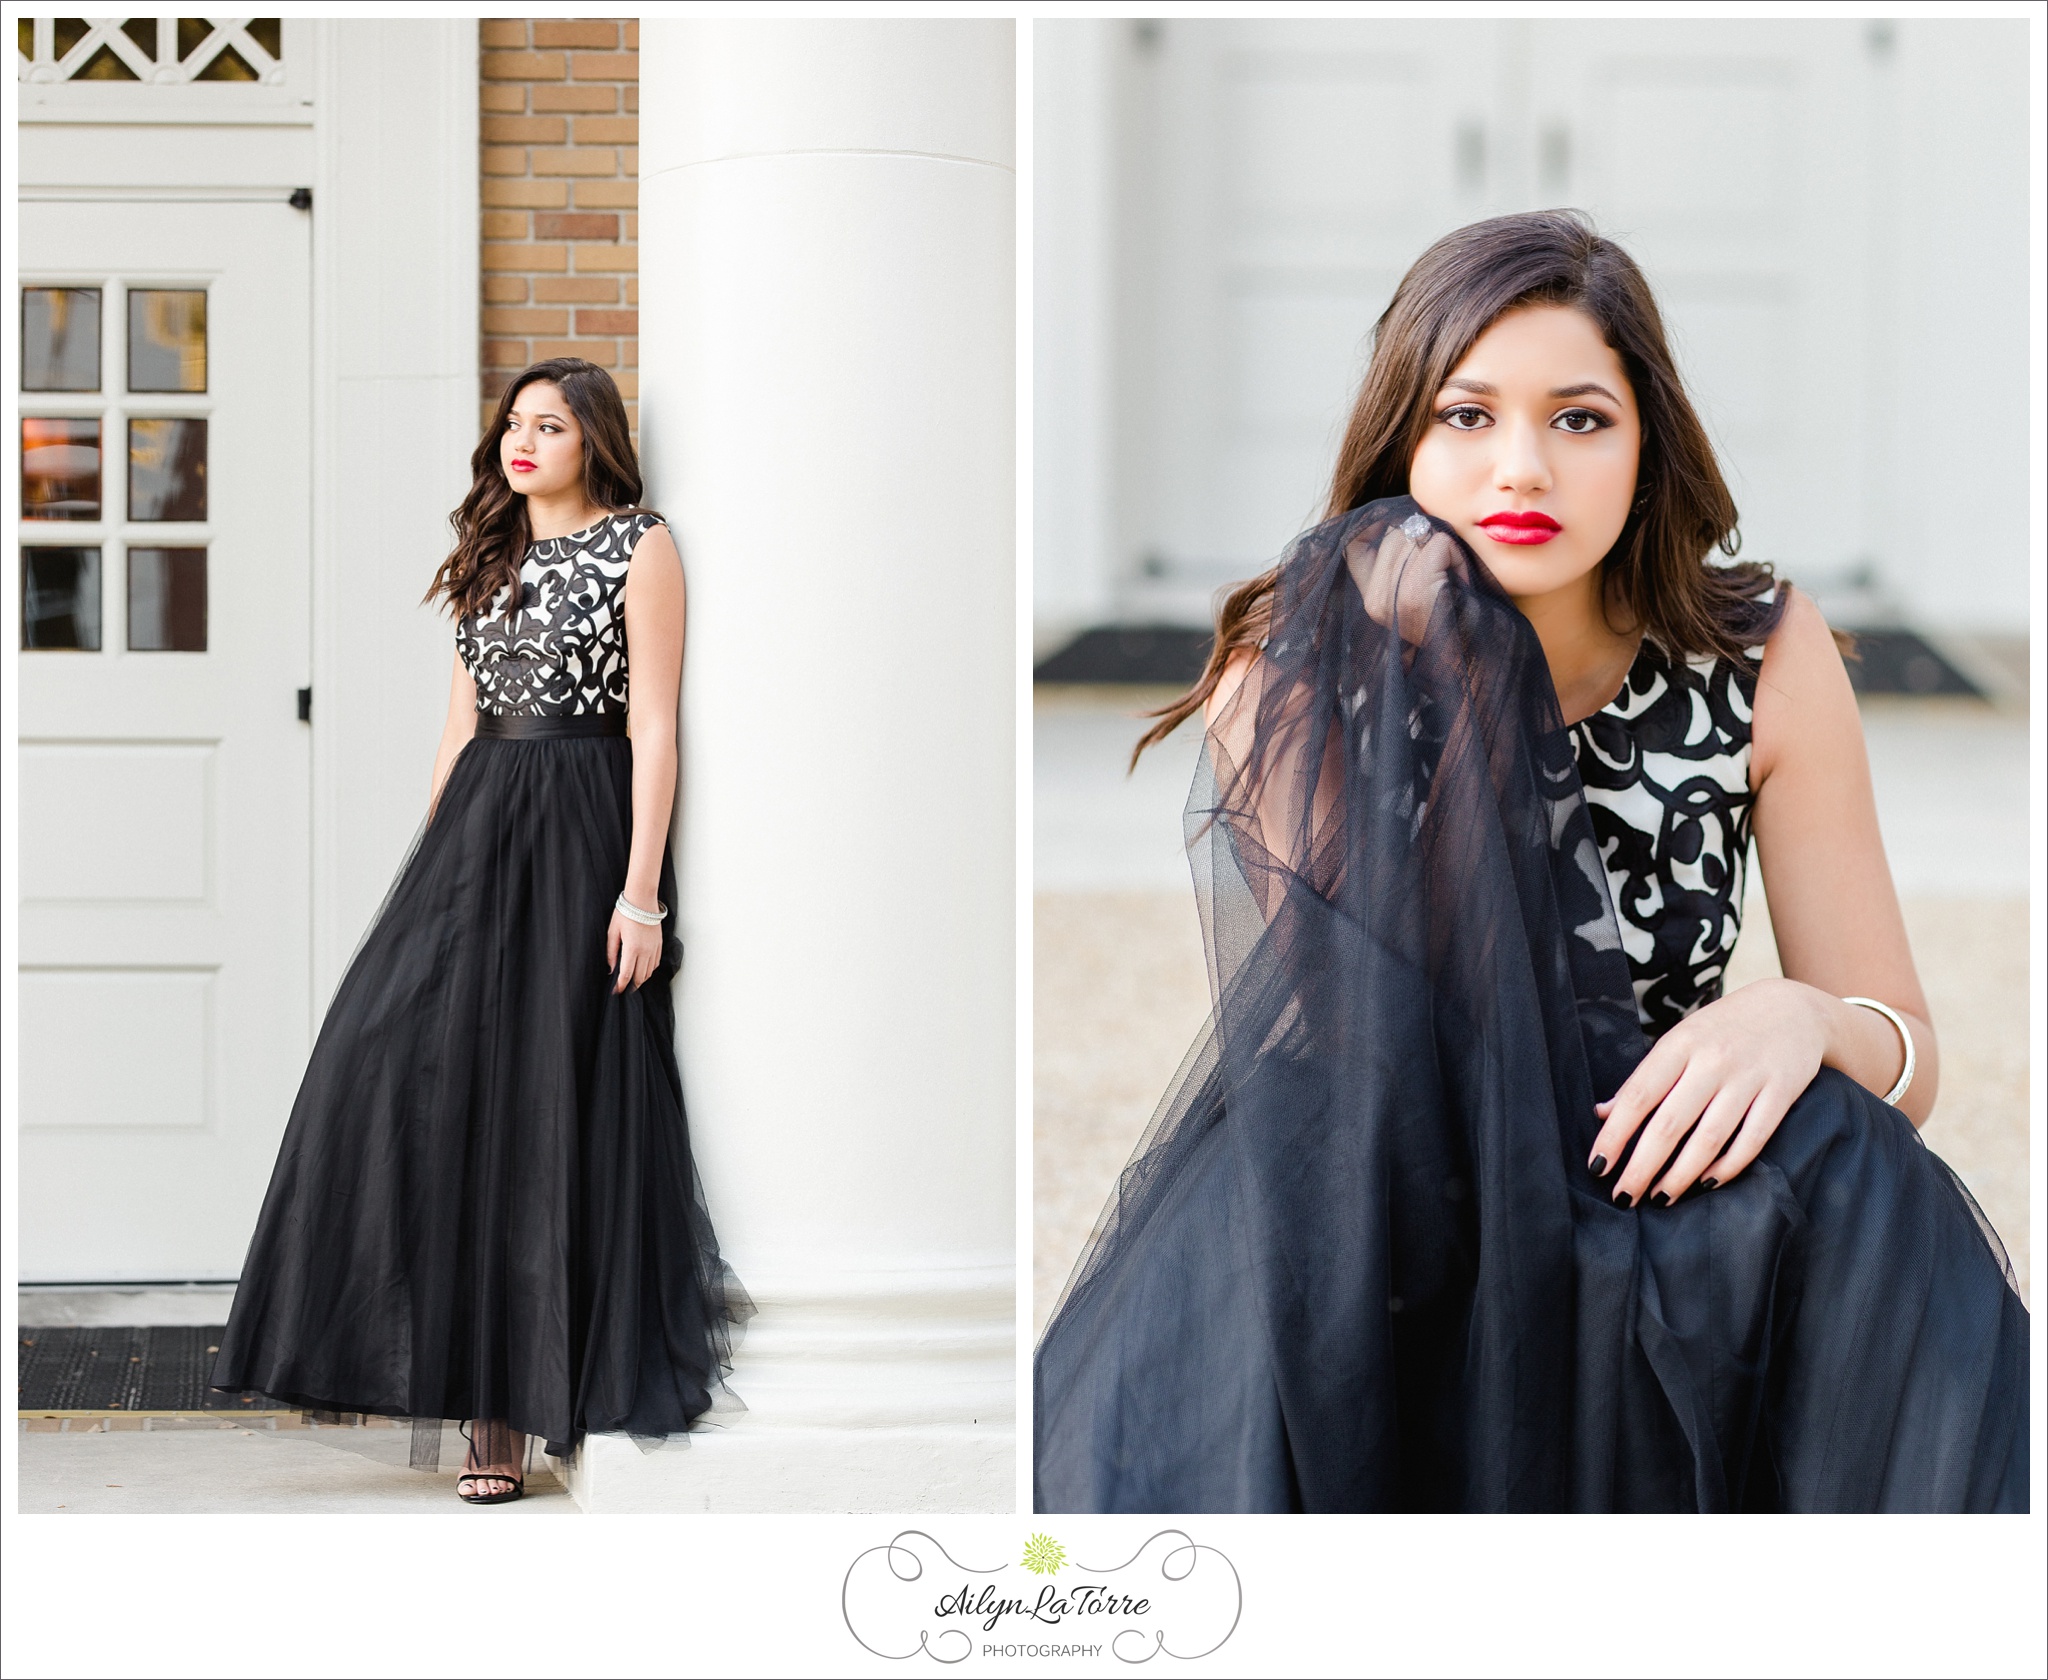 Tampa Senior Photographer | © Ailyn La Torre Photography 2015